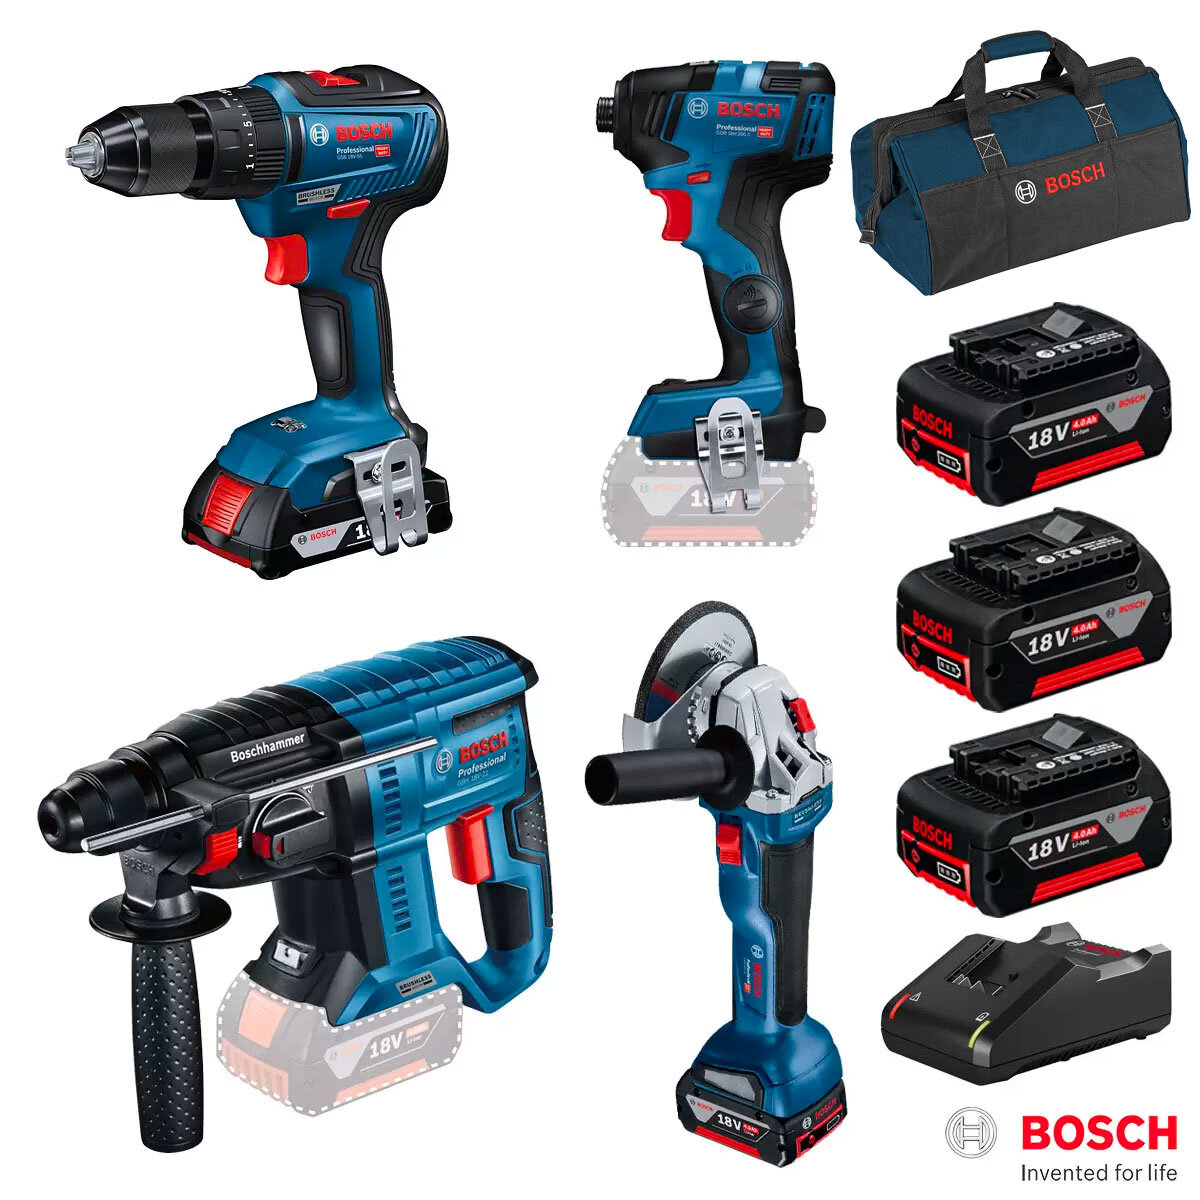 Ordering Bosch Cordless Tools from Europe